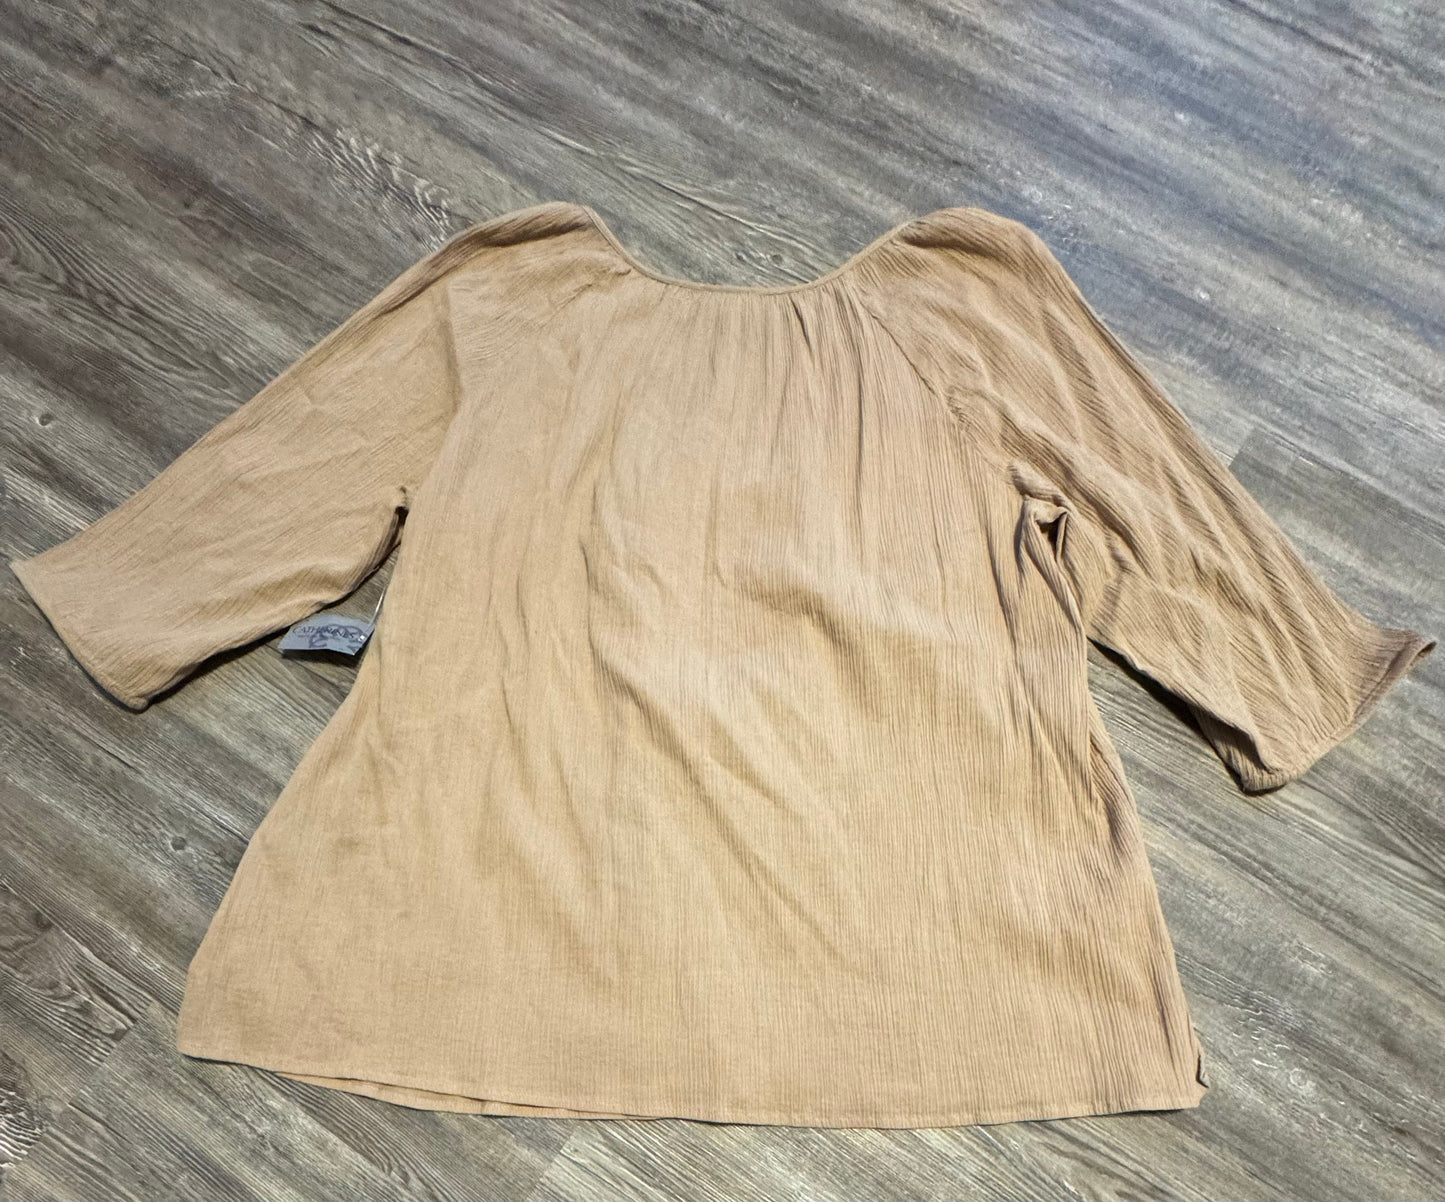 Top Long Sleeve By Catherines  Size: 2x